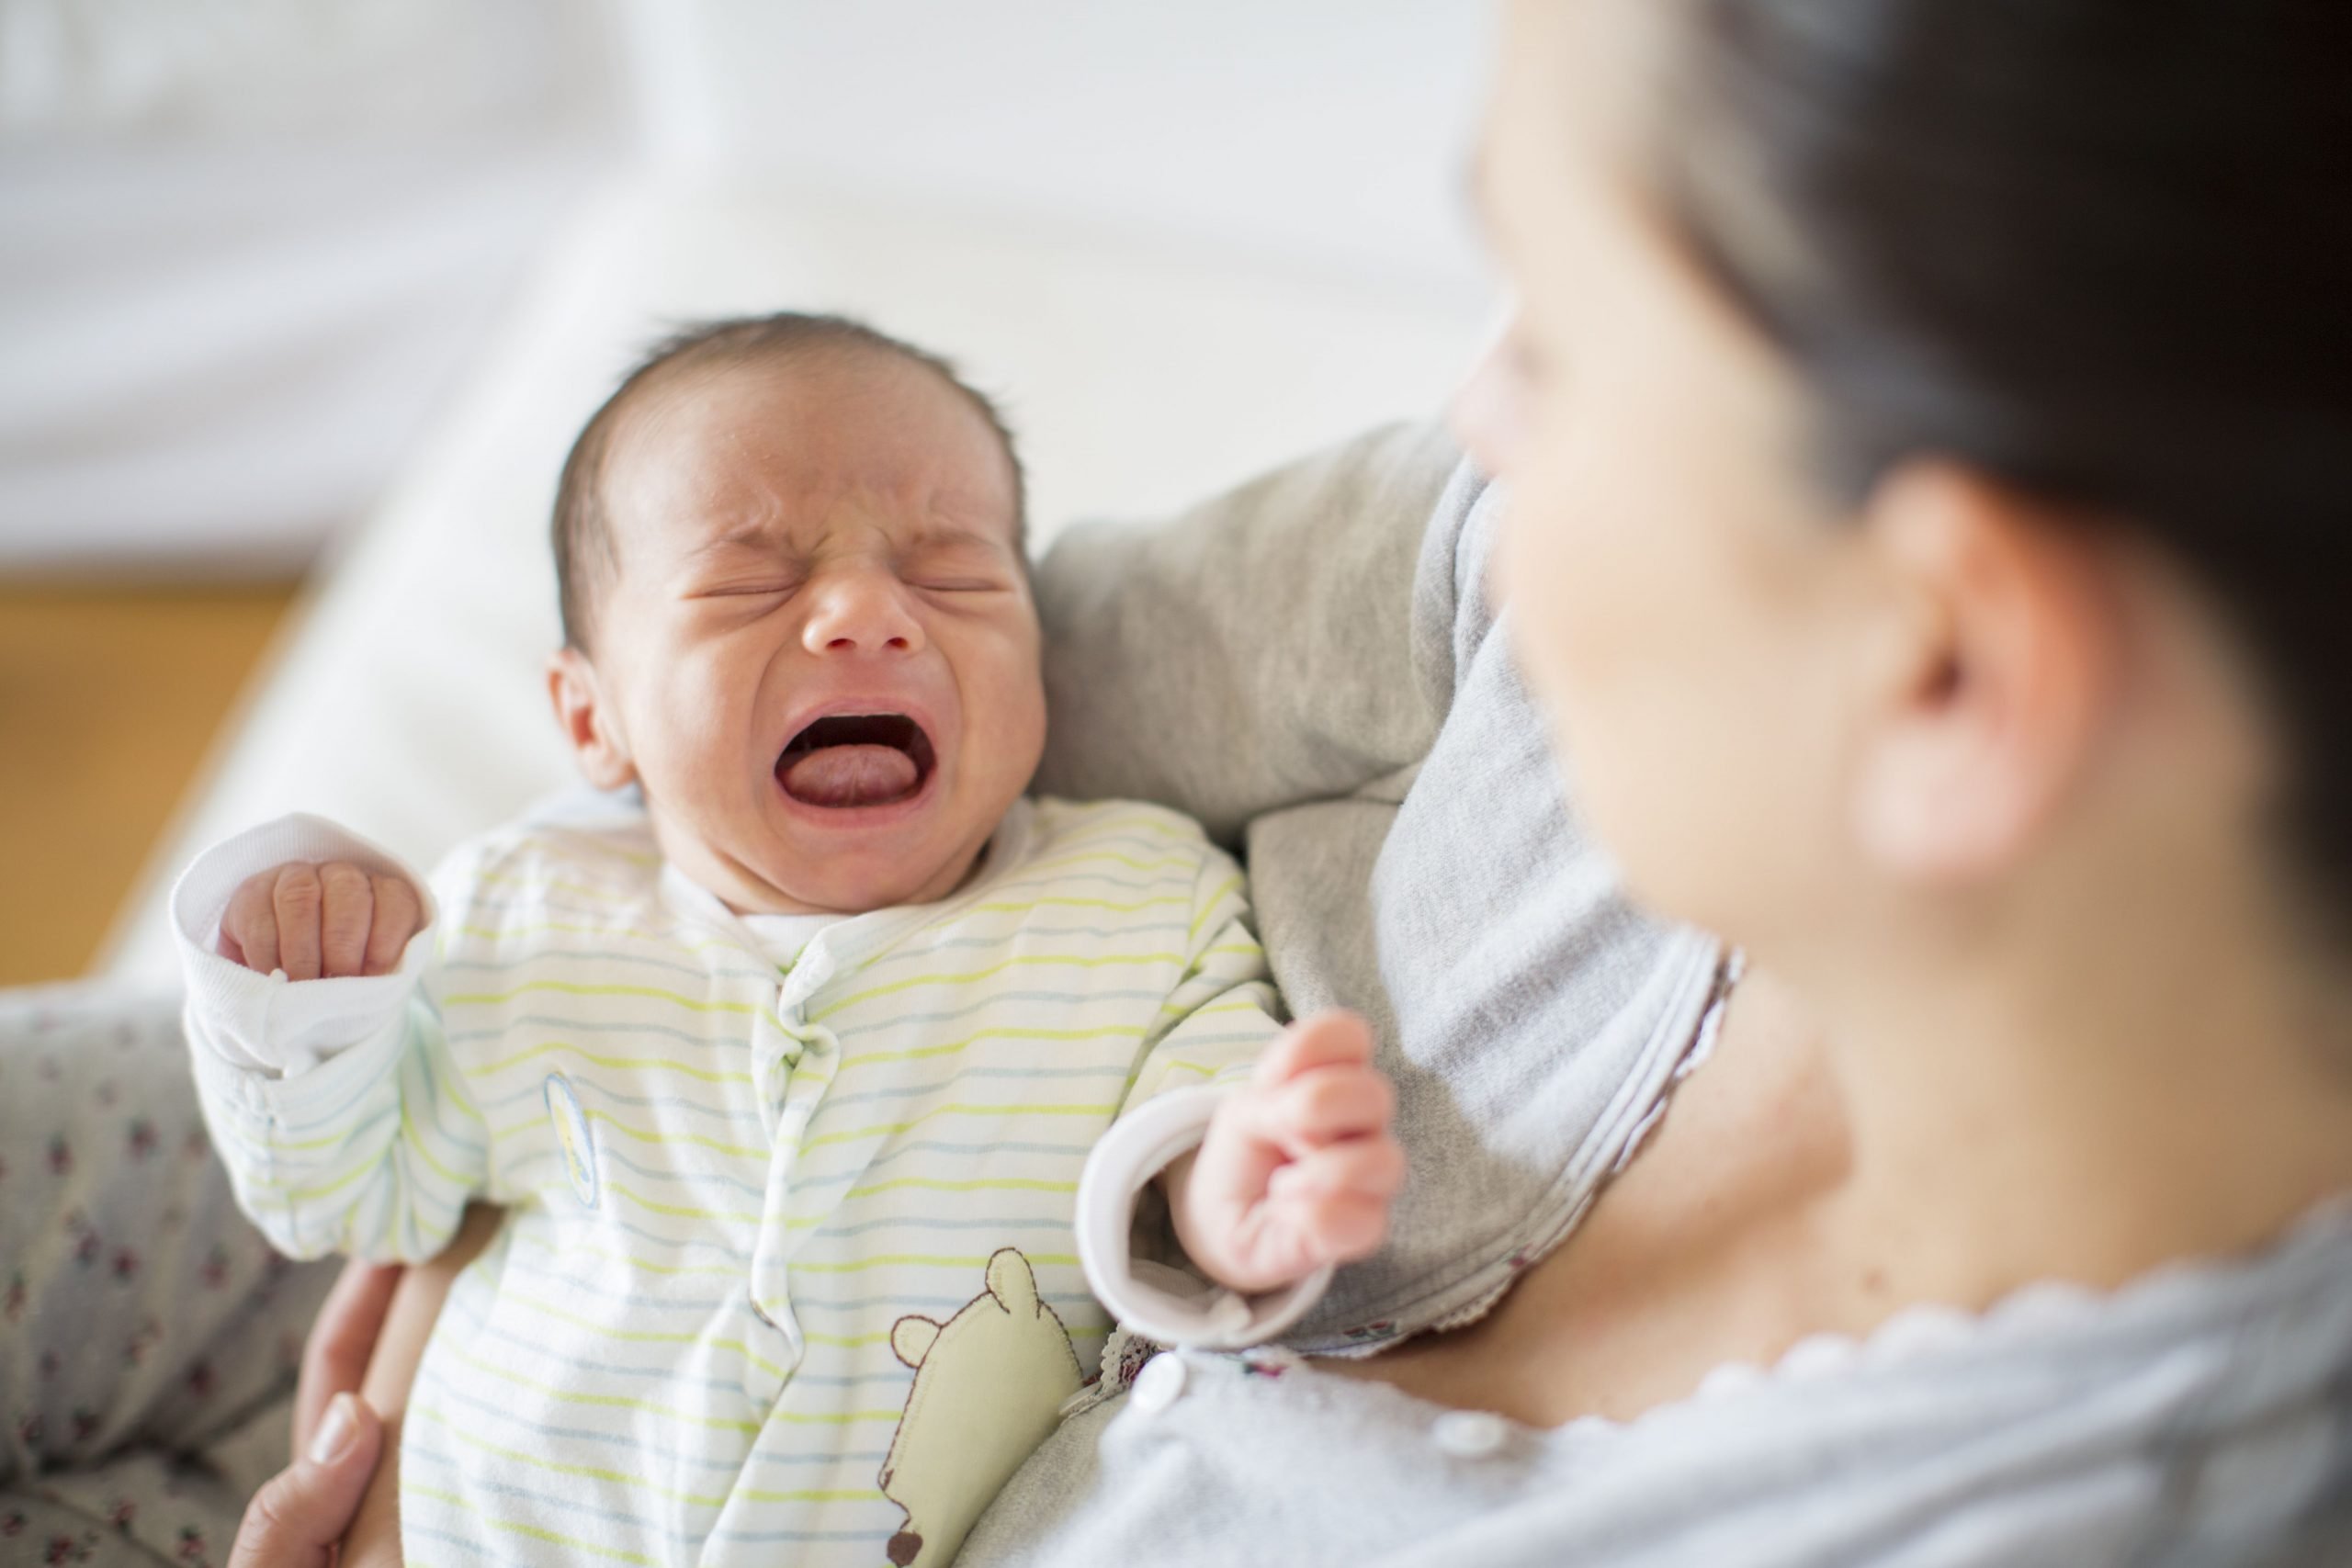 How to Know When Your Baby Is Hungry